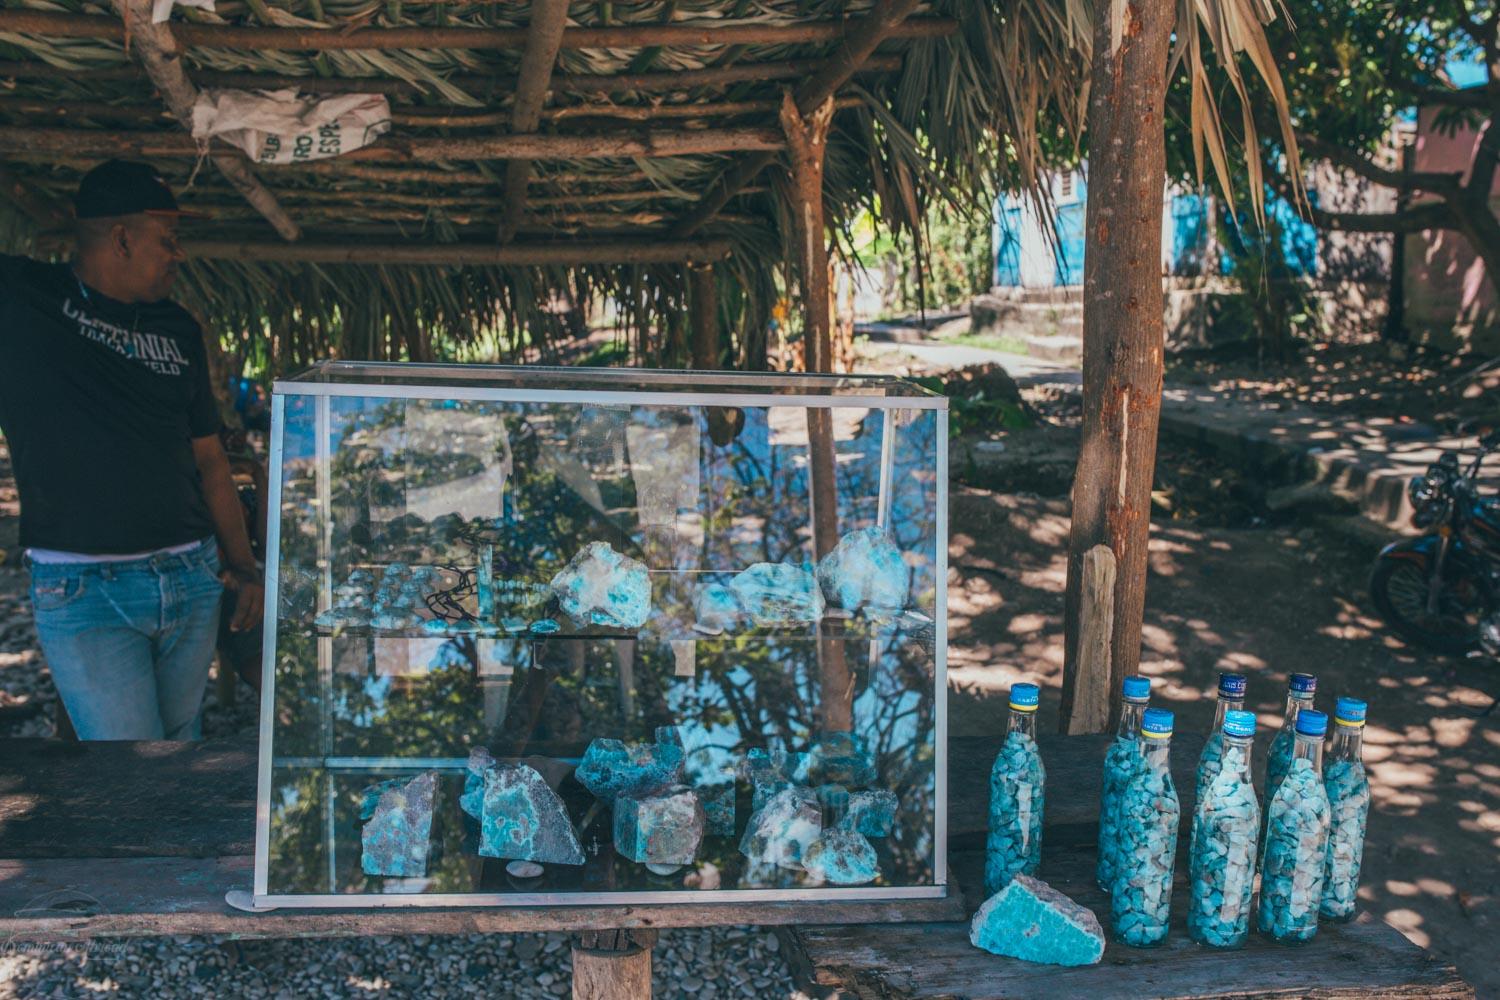 Stop by the Larimar stands in Barahona.